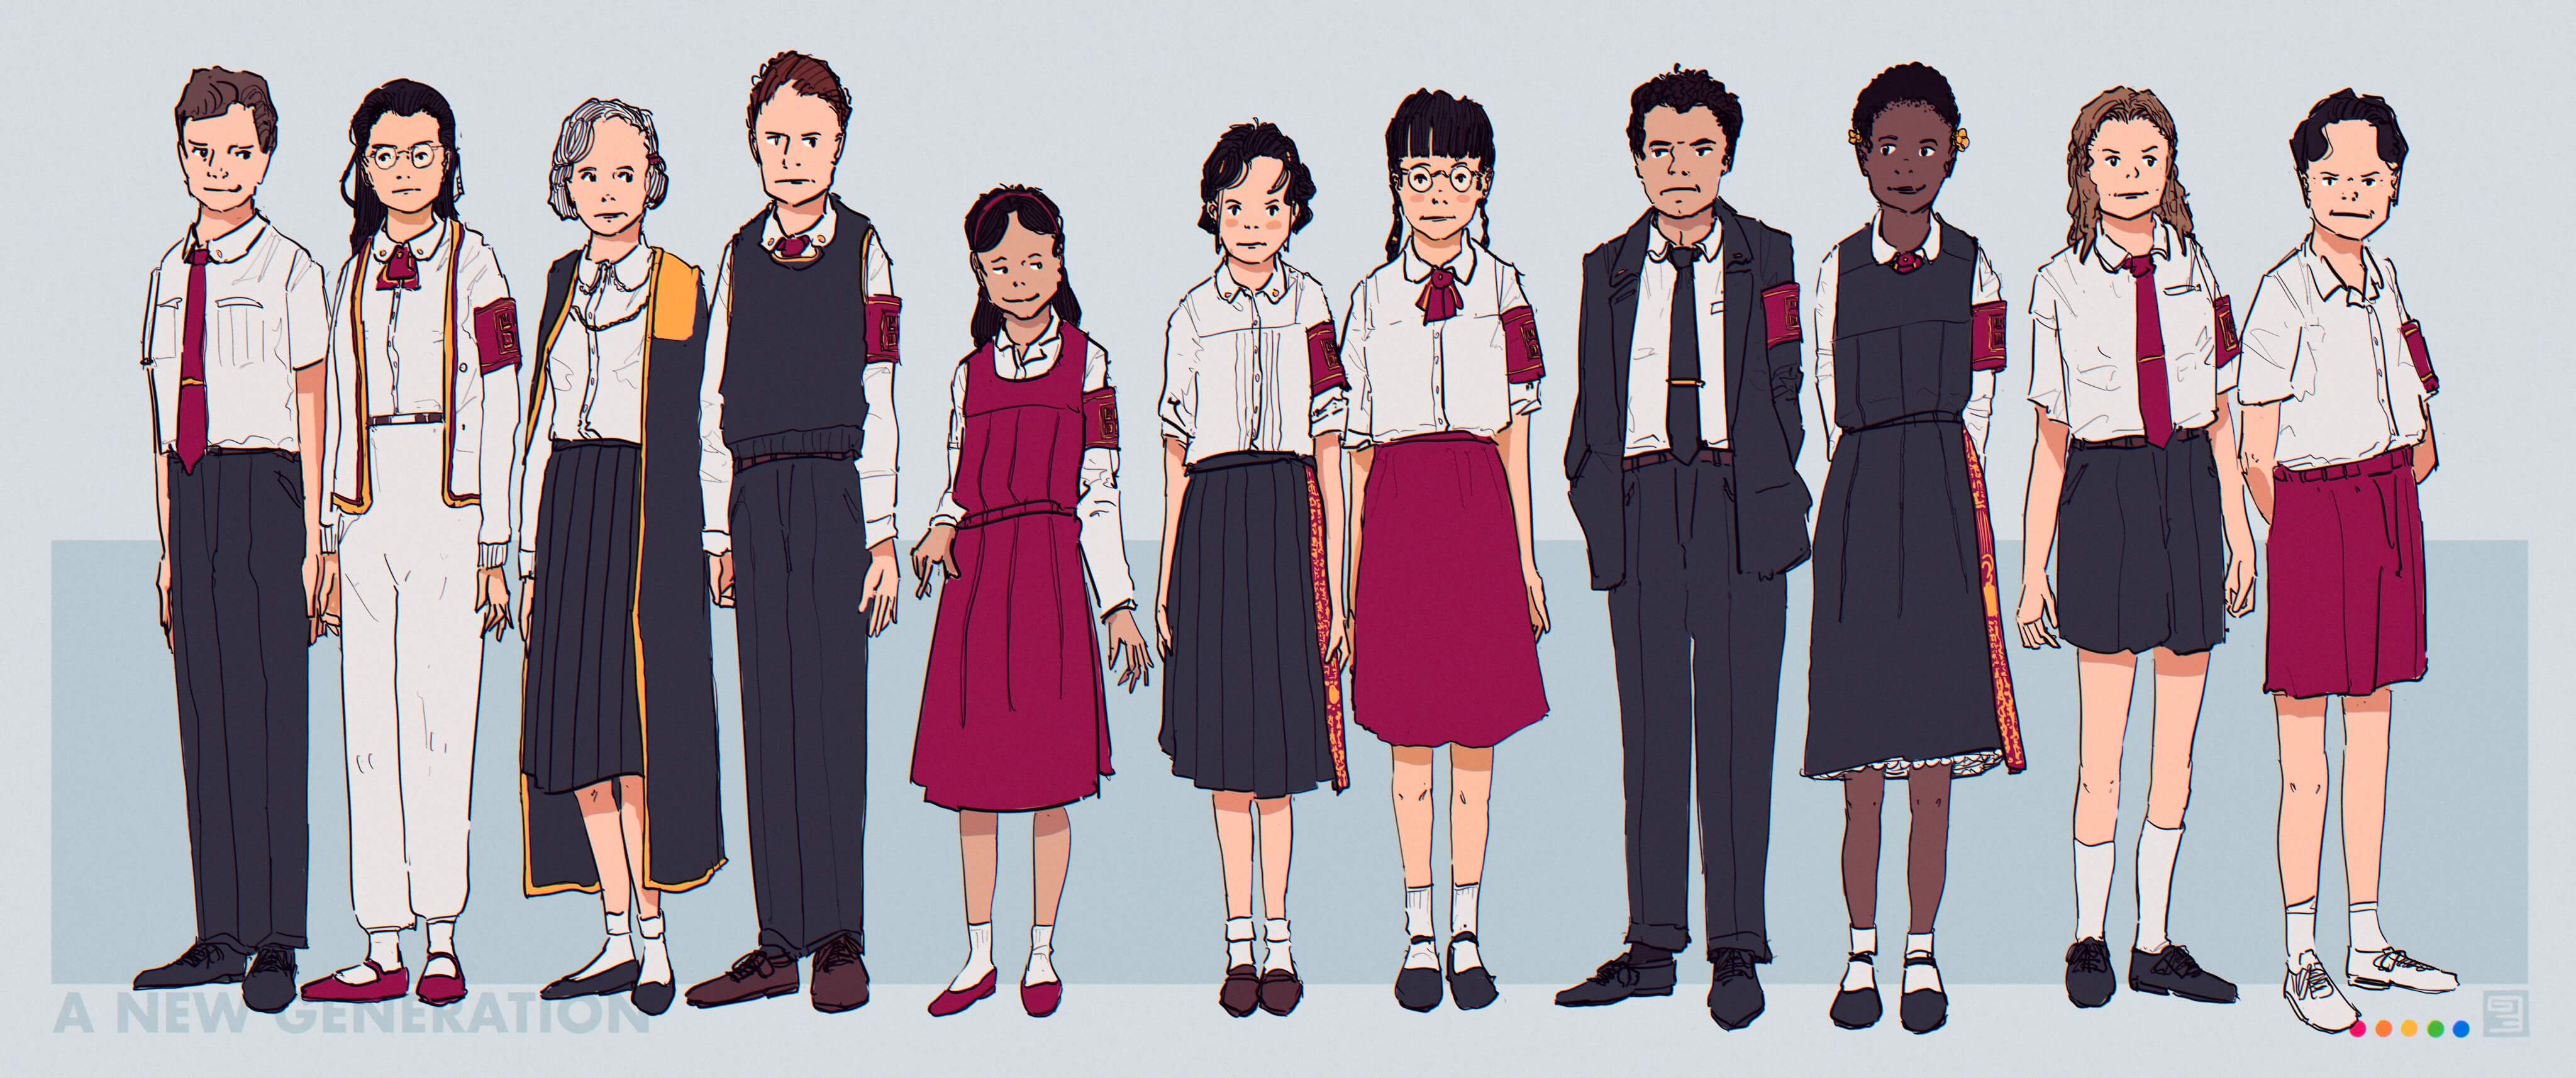 Illustration of different ways of wearing the same school uniform